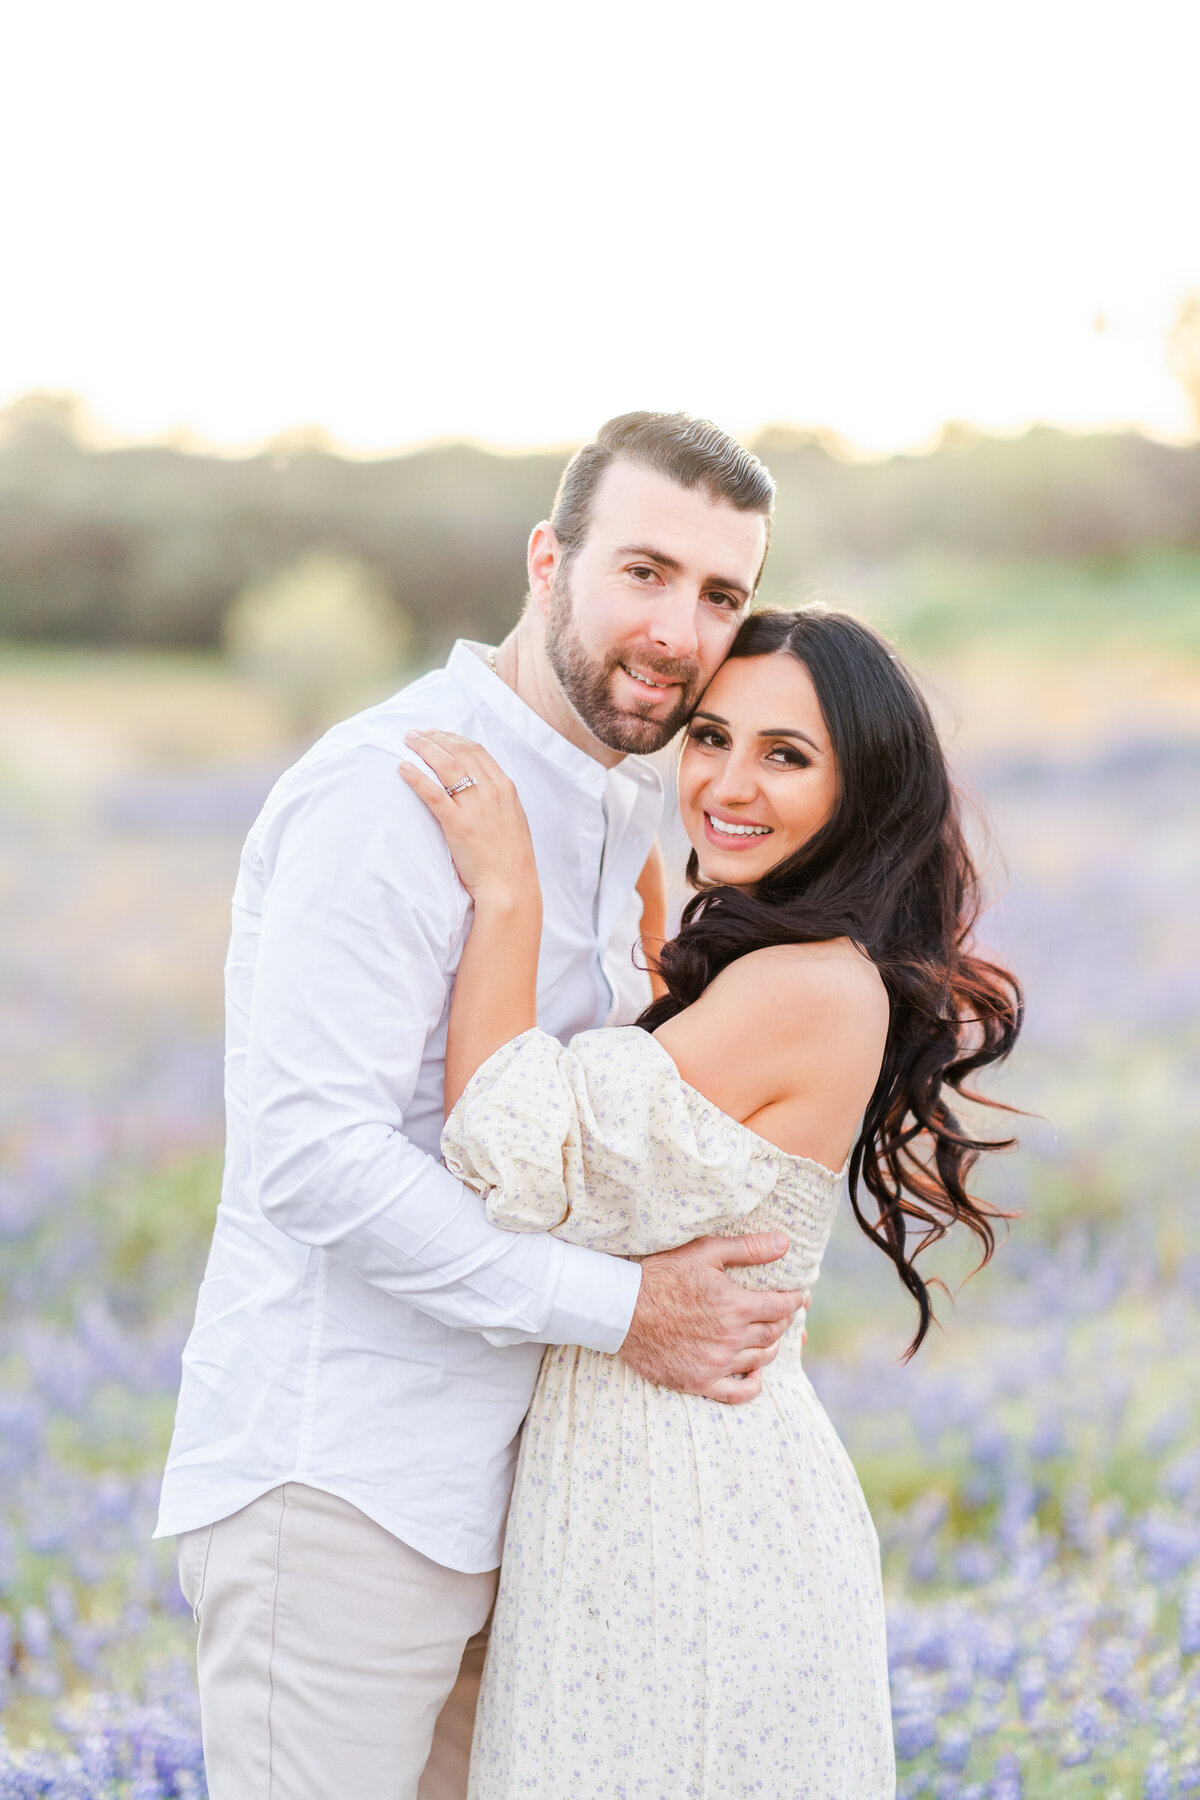 A couple stands embracing one another in a field of purple lupines photographed by bay area photographer, Light Livin Photography.